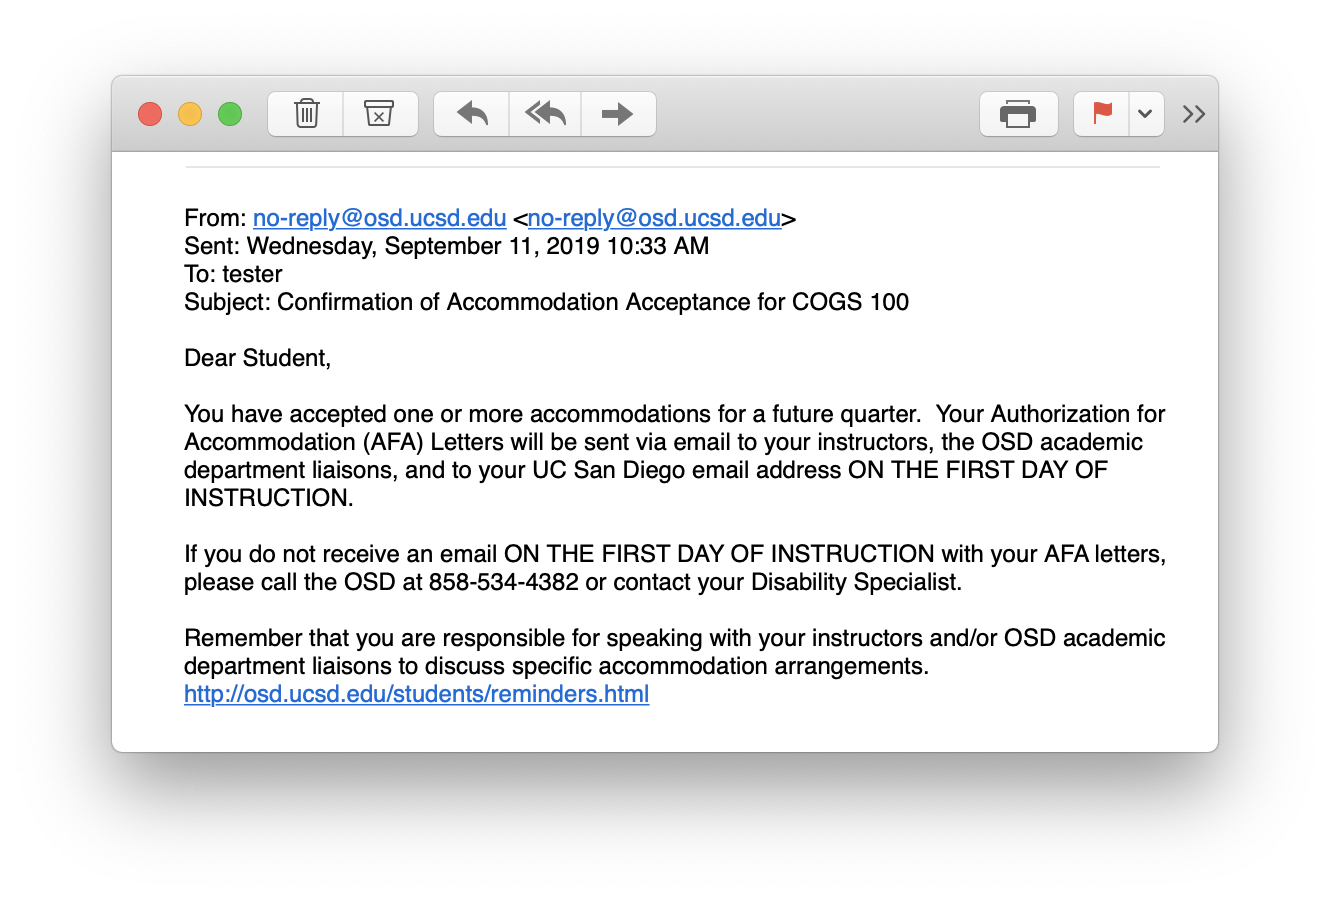 Screenshot of the email message you will receive confirming your accepted accommodations before the first day of instruction.